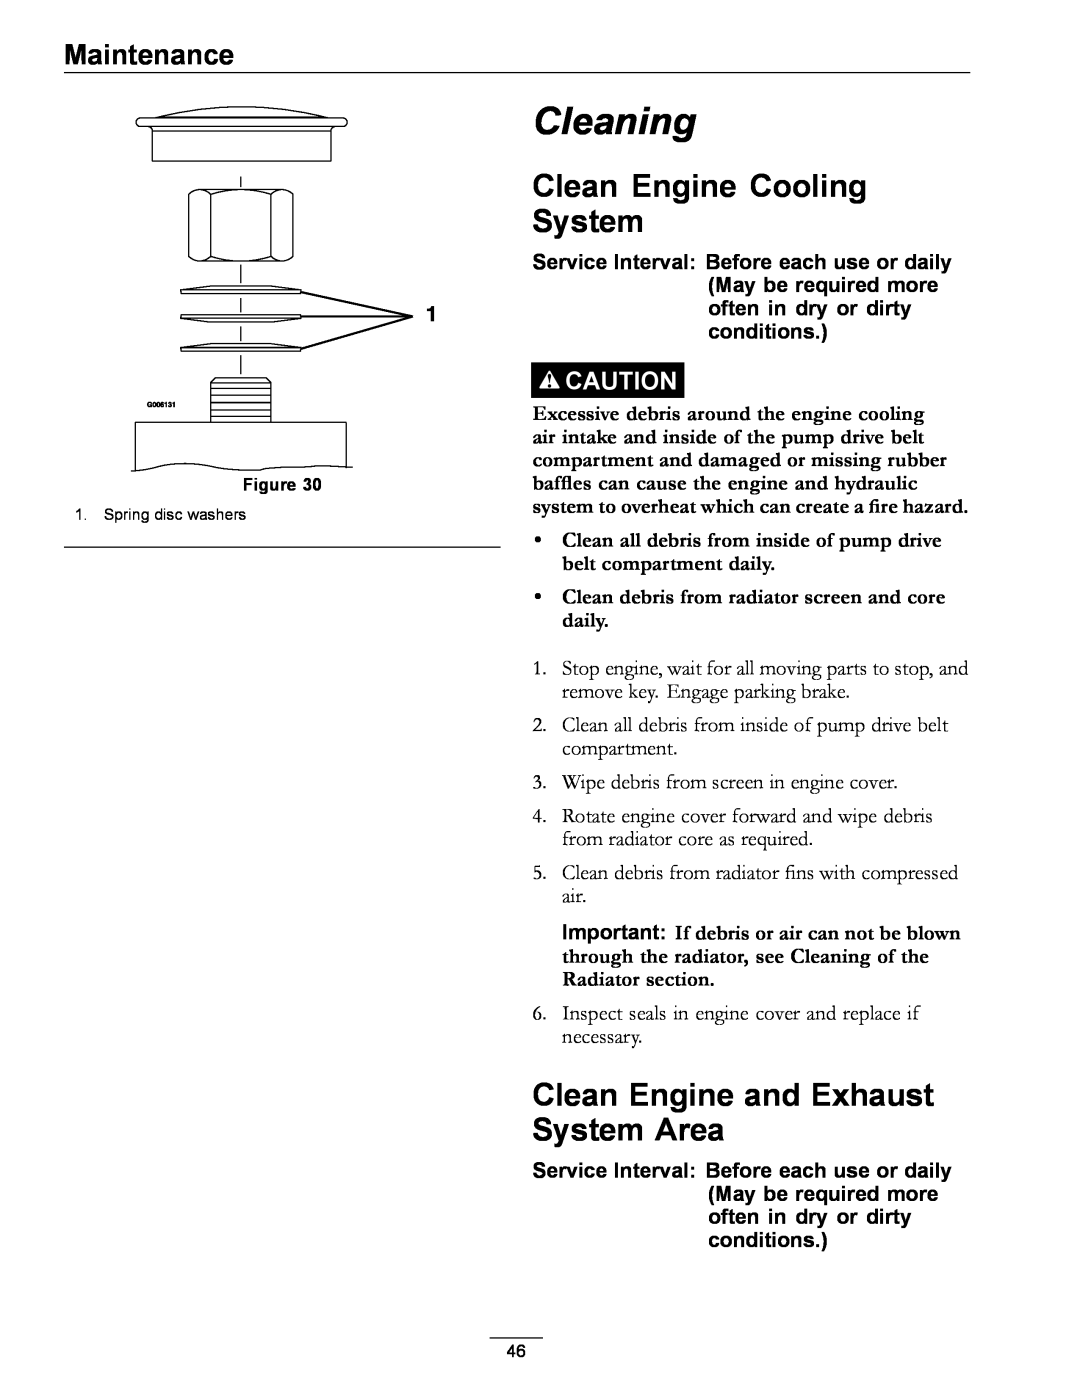 Exmark 920 manual Cleaning, Clean Engine Cooling System, Clean Engine and Exhaust System Area, Maintenance 